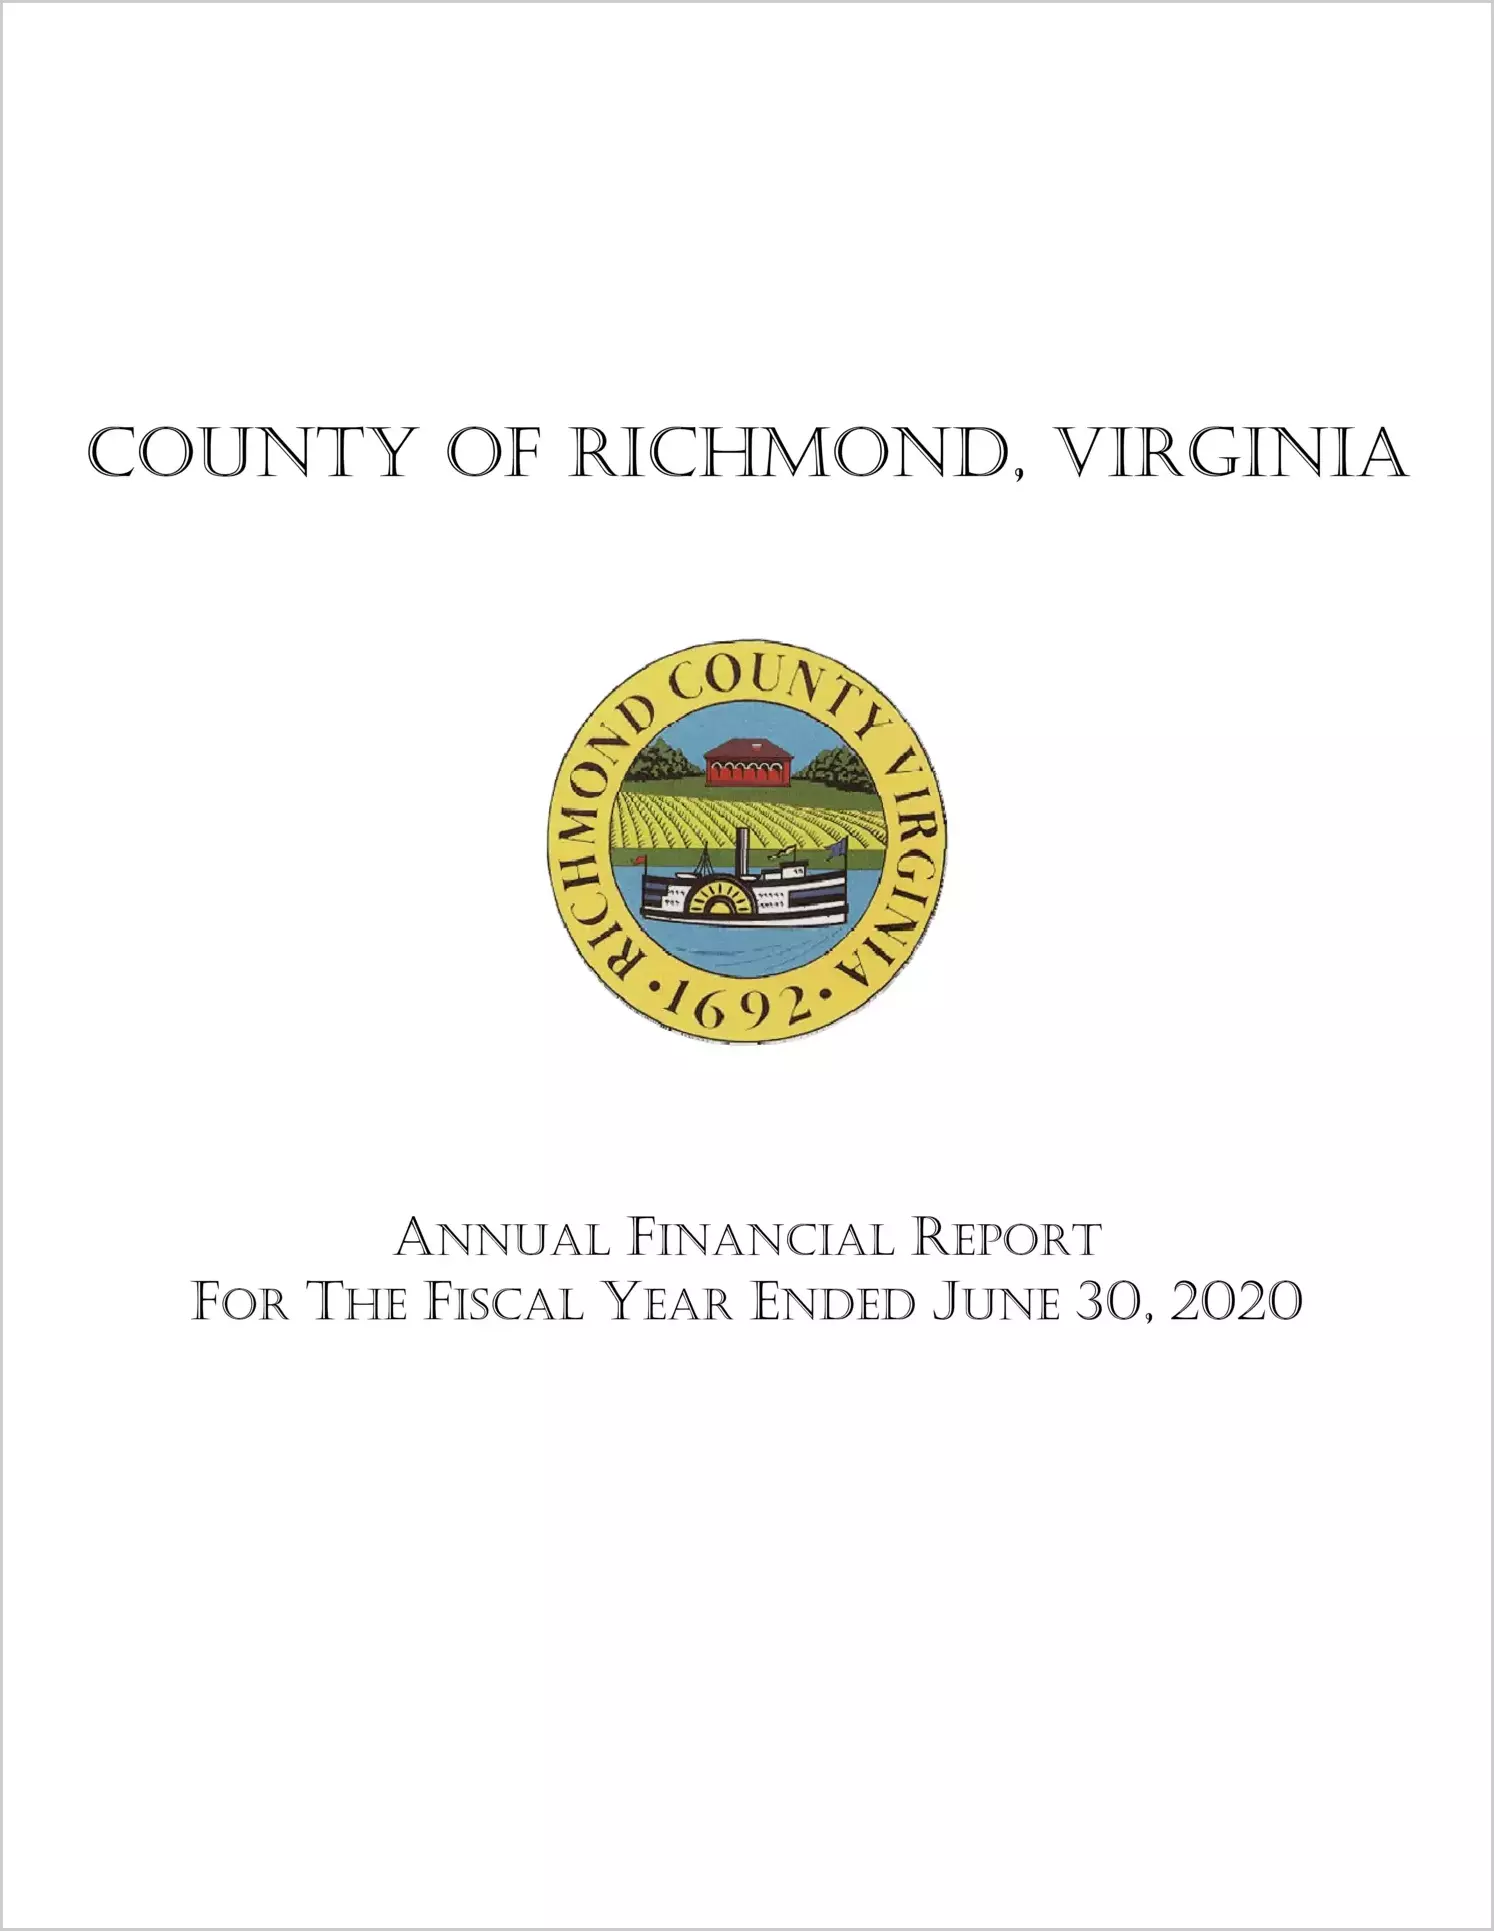 2020 Annual Financial Report for County of Richmond